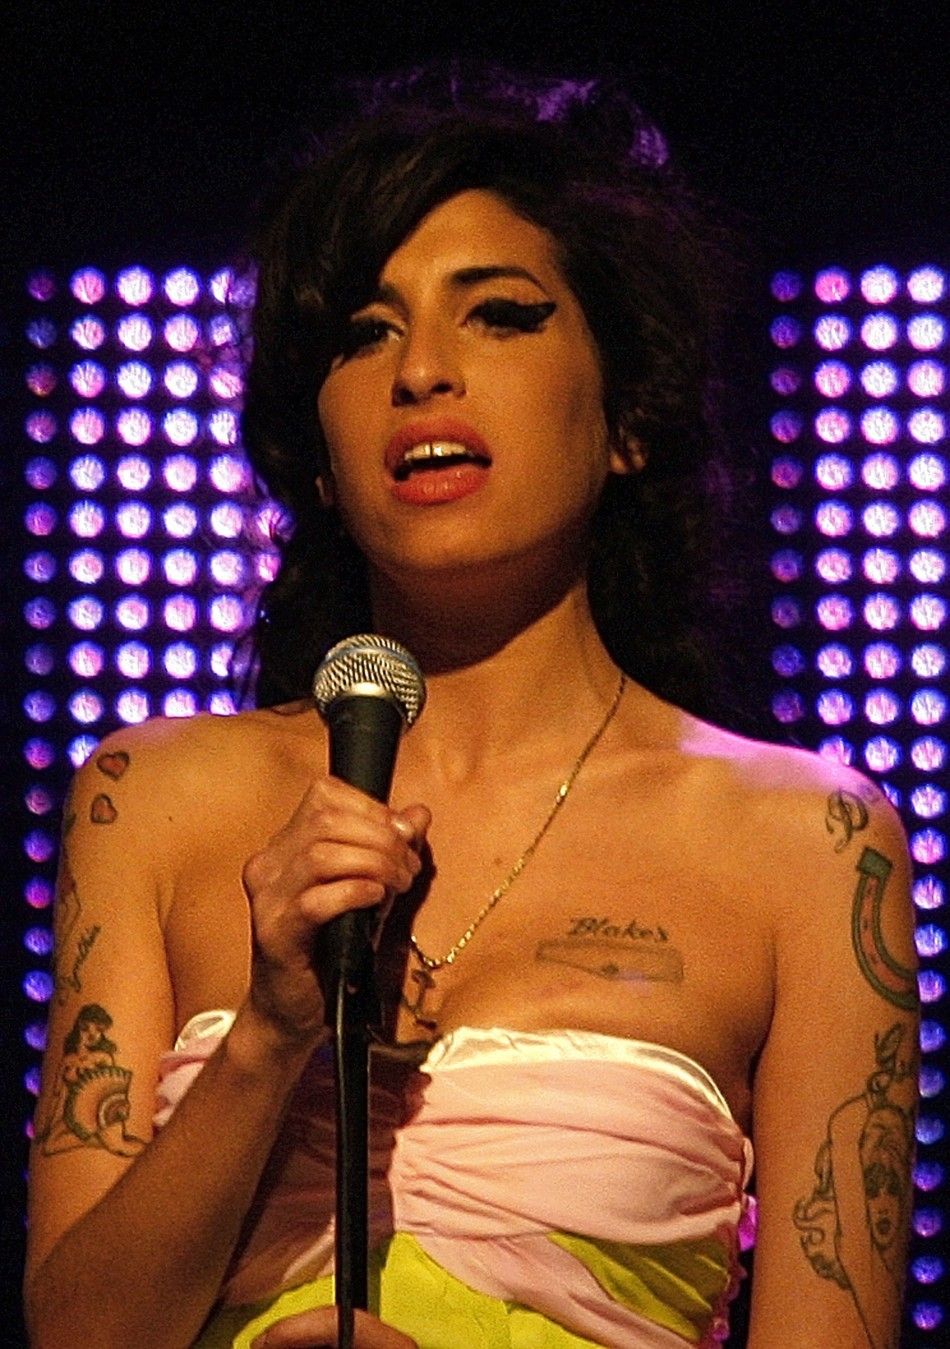 Amy Winehouse died on 23 July, 2011 aged 27 at her London home. She had been struggling with substance abuse for years. The cause of her death is unknown as yet.